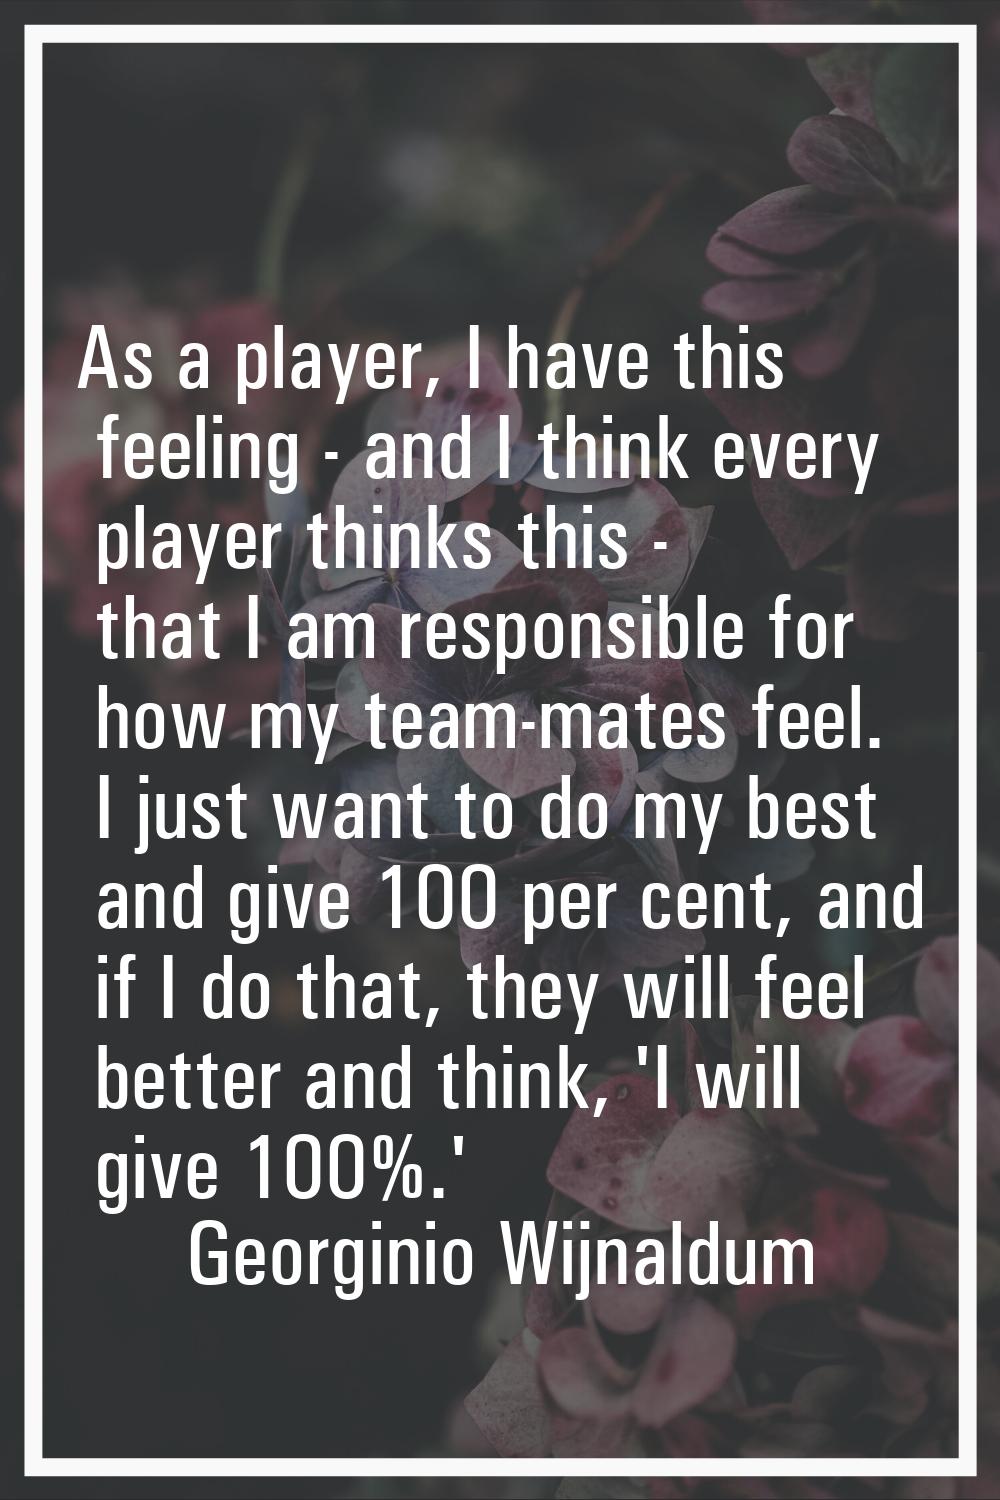 As a player, I have this feeling - and I think every player thinks this - that I am responsible for